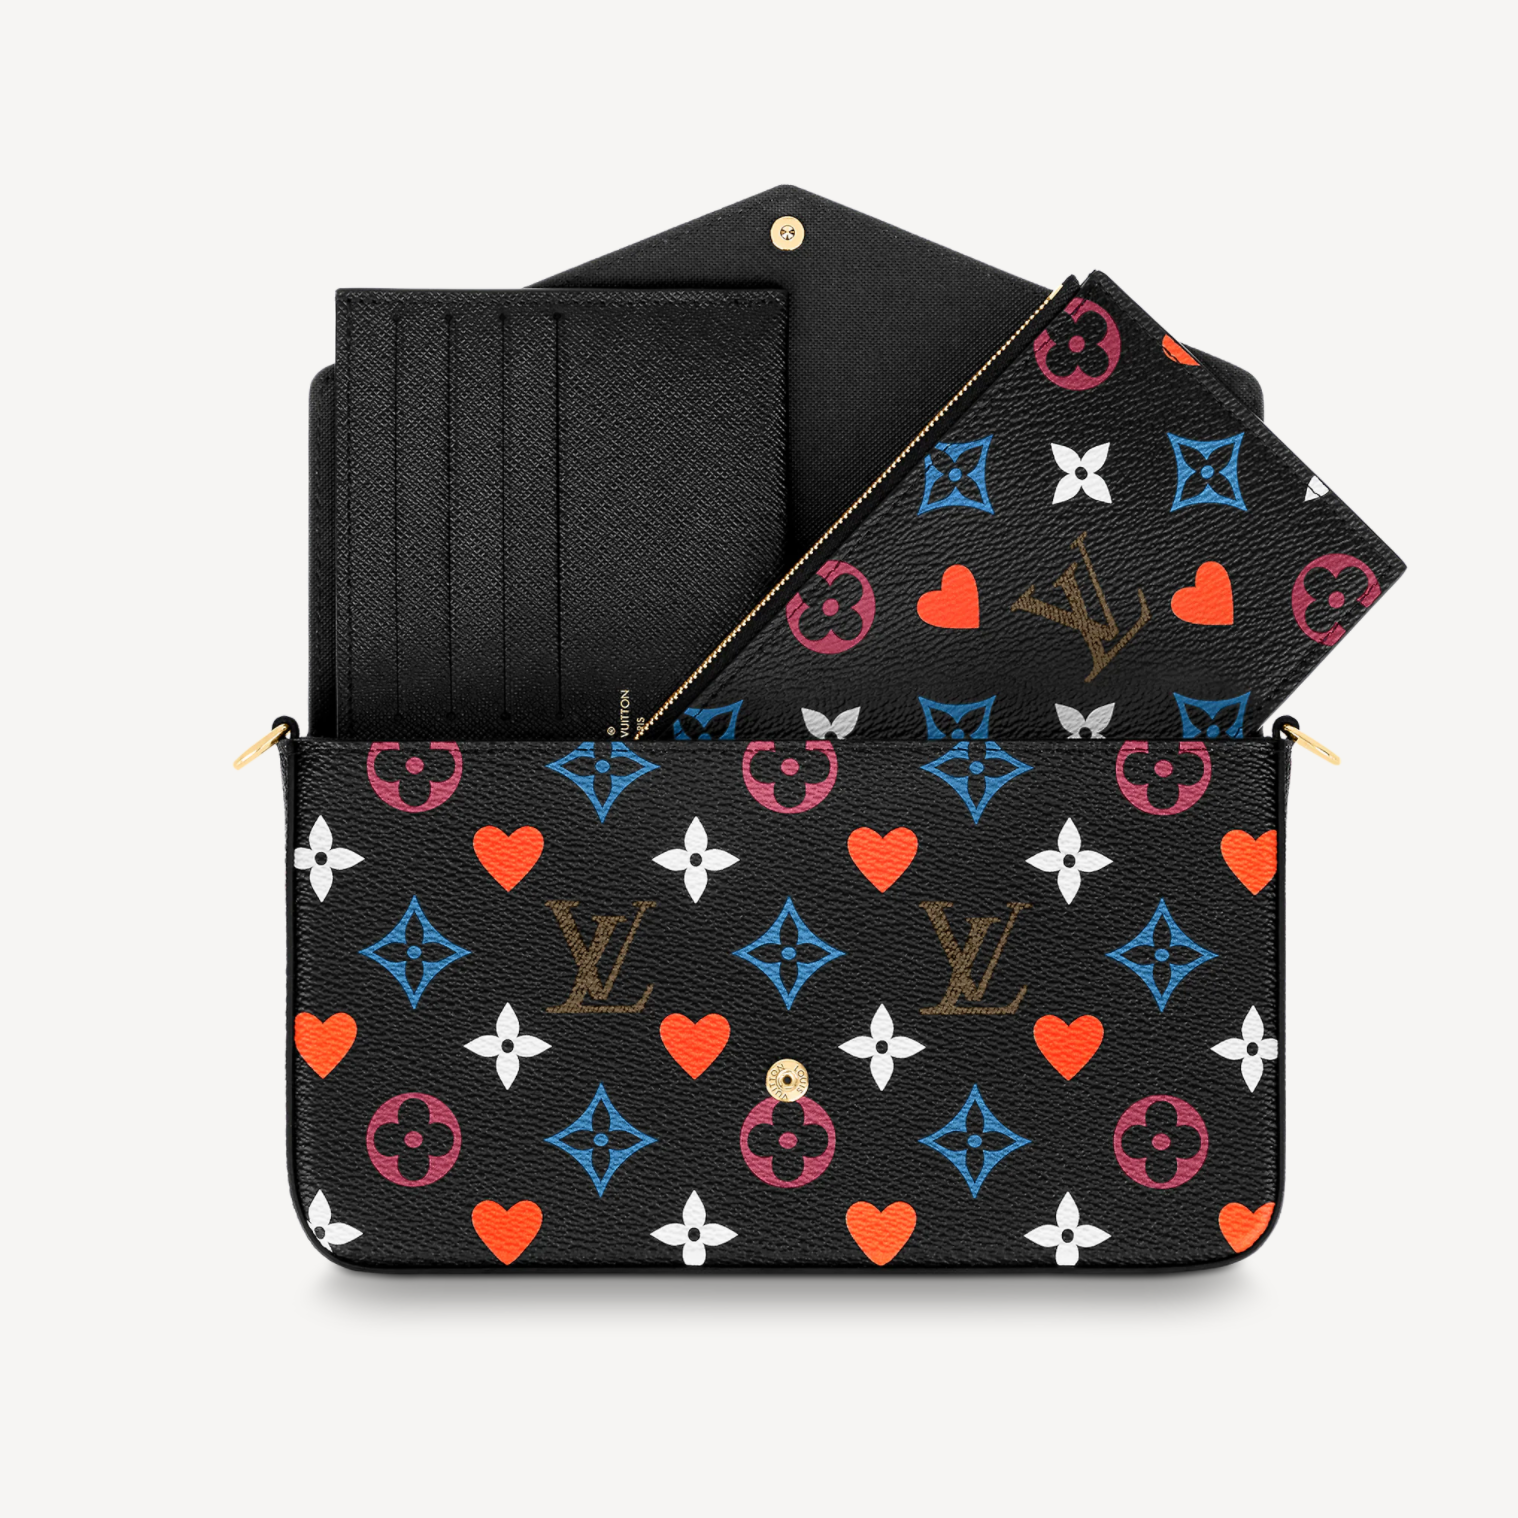 Louis Vuitton Pochette Felicie Game on M80232 by The-Collectory